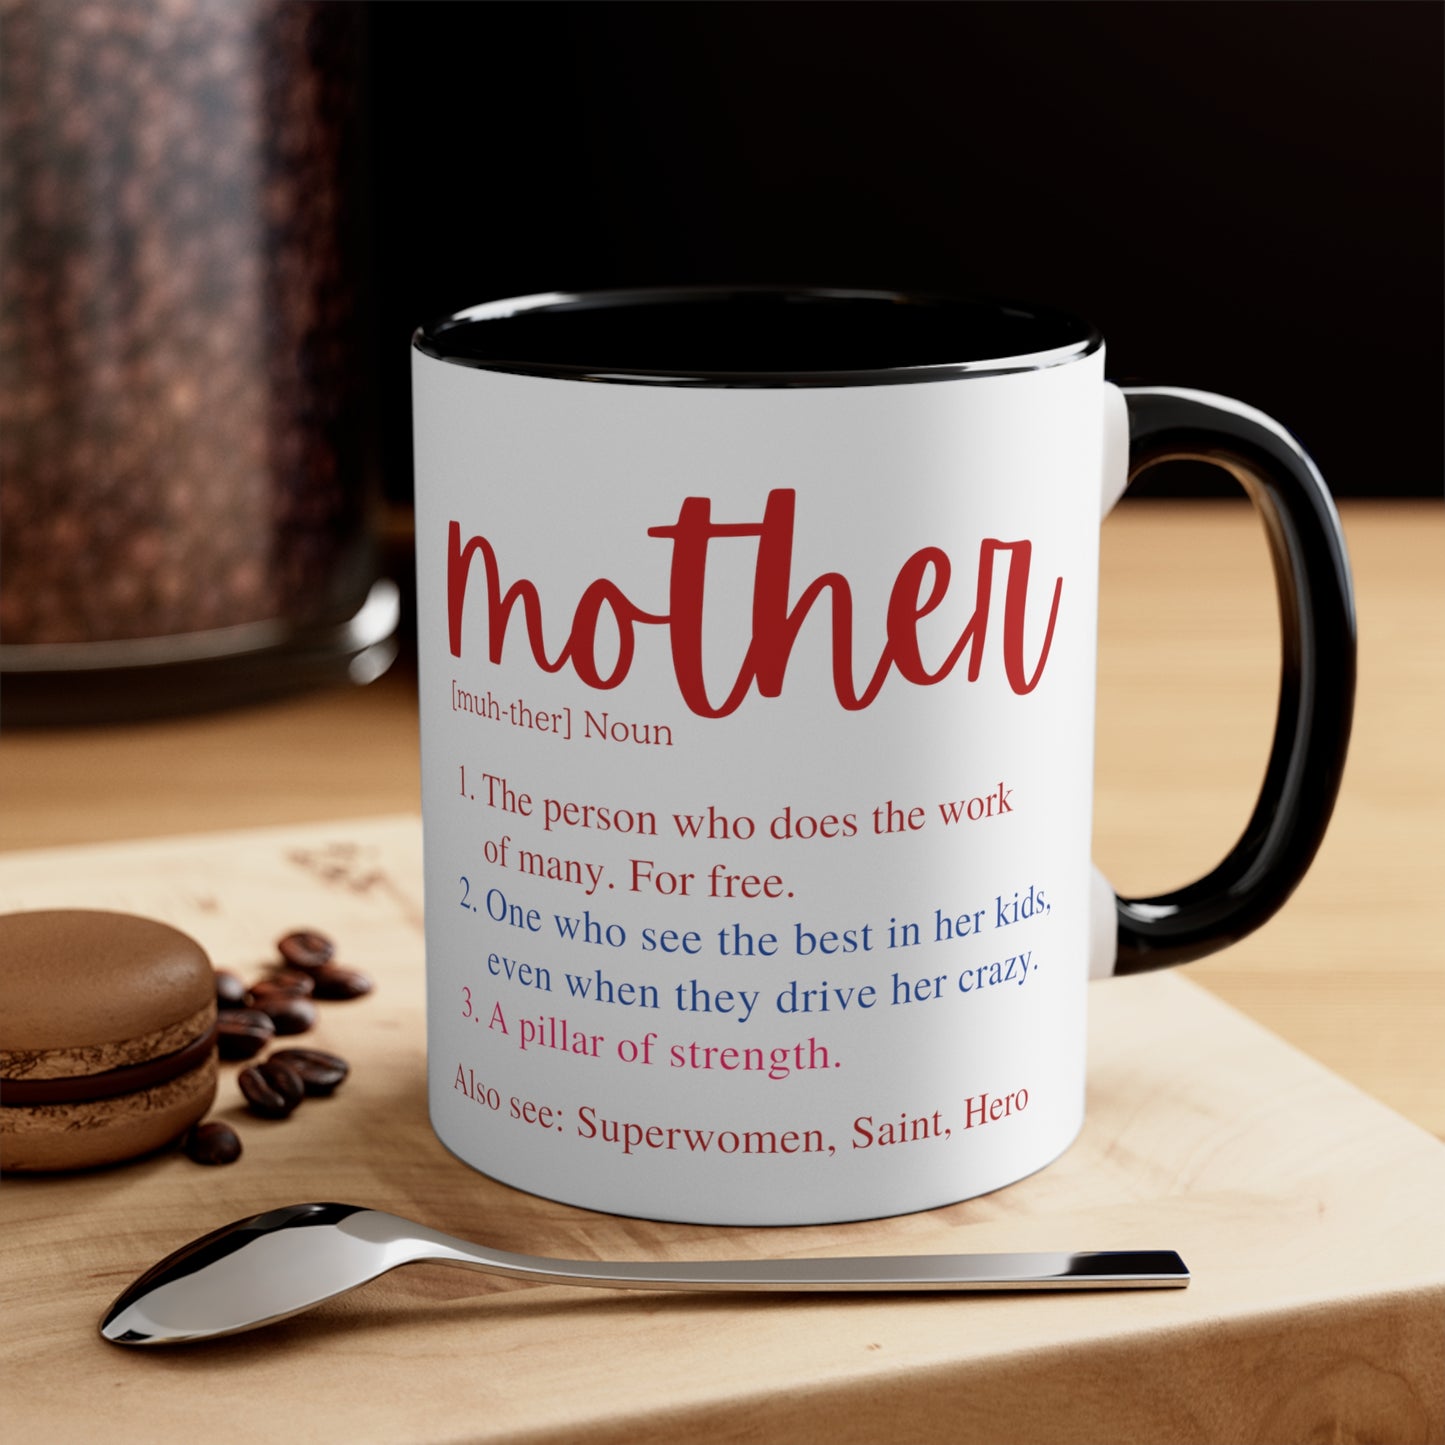 Definition of Mother, Customizable Accent Coffee Mug, 11oz